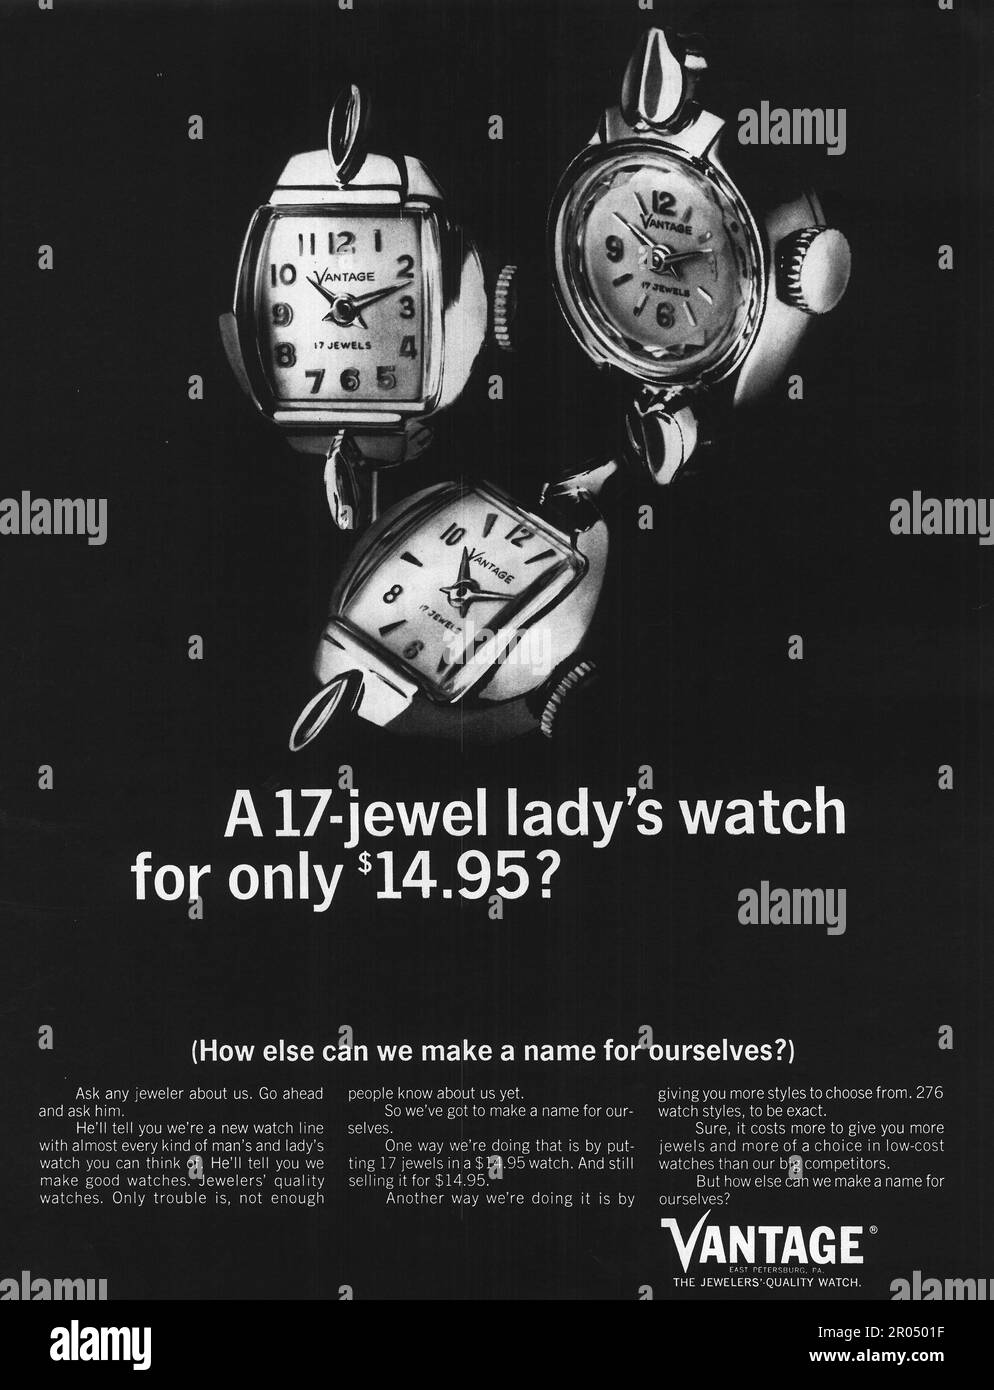 Vantage lady's watch advert in a Journal magazine, 1965. 'A 17-jewel lady's watch for only $14.95.' Stock Photo